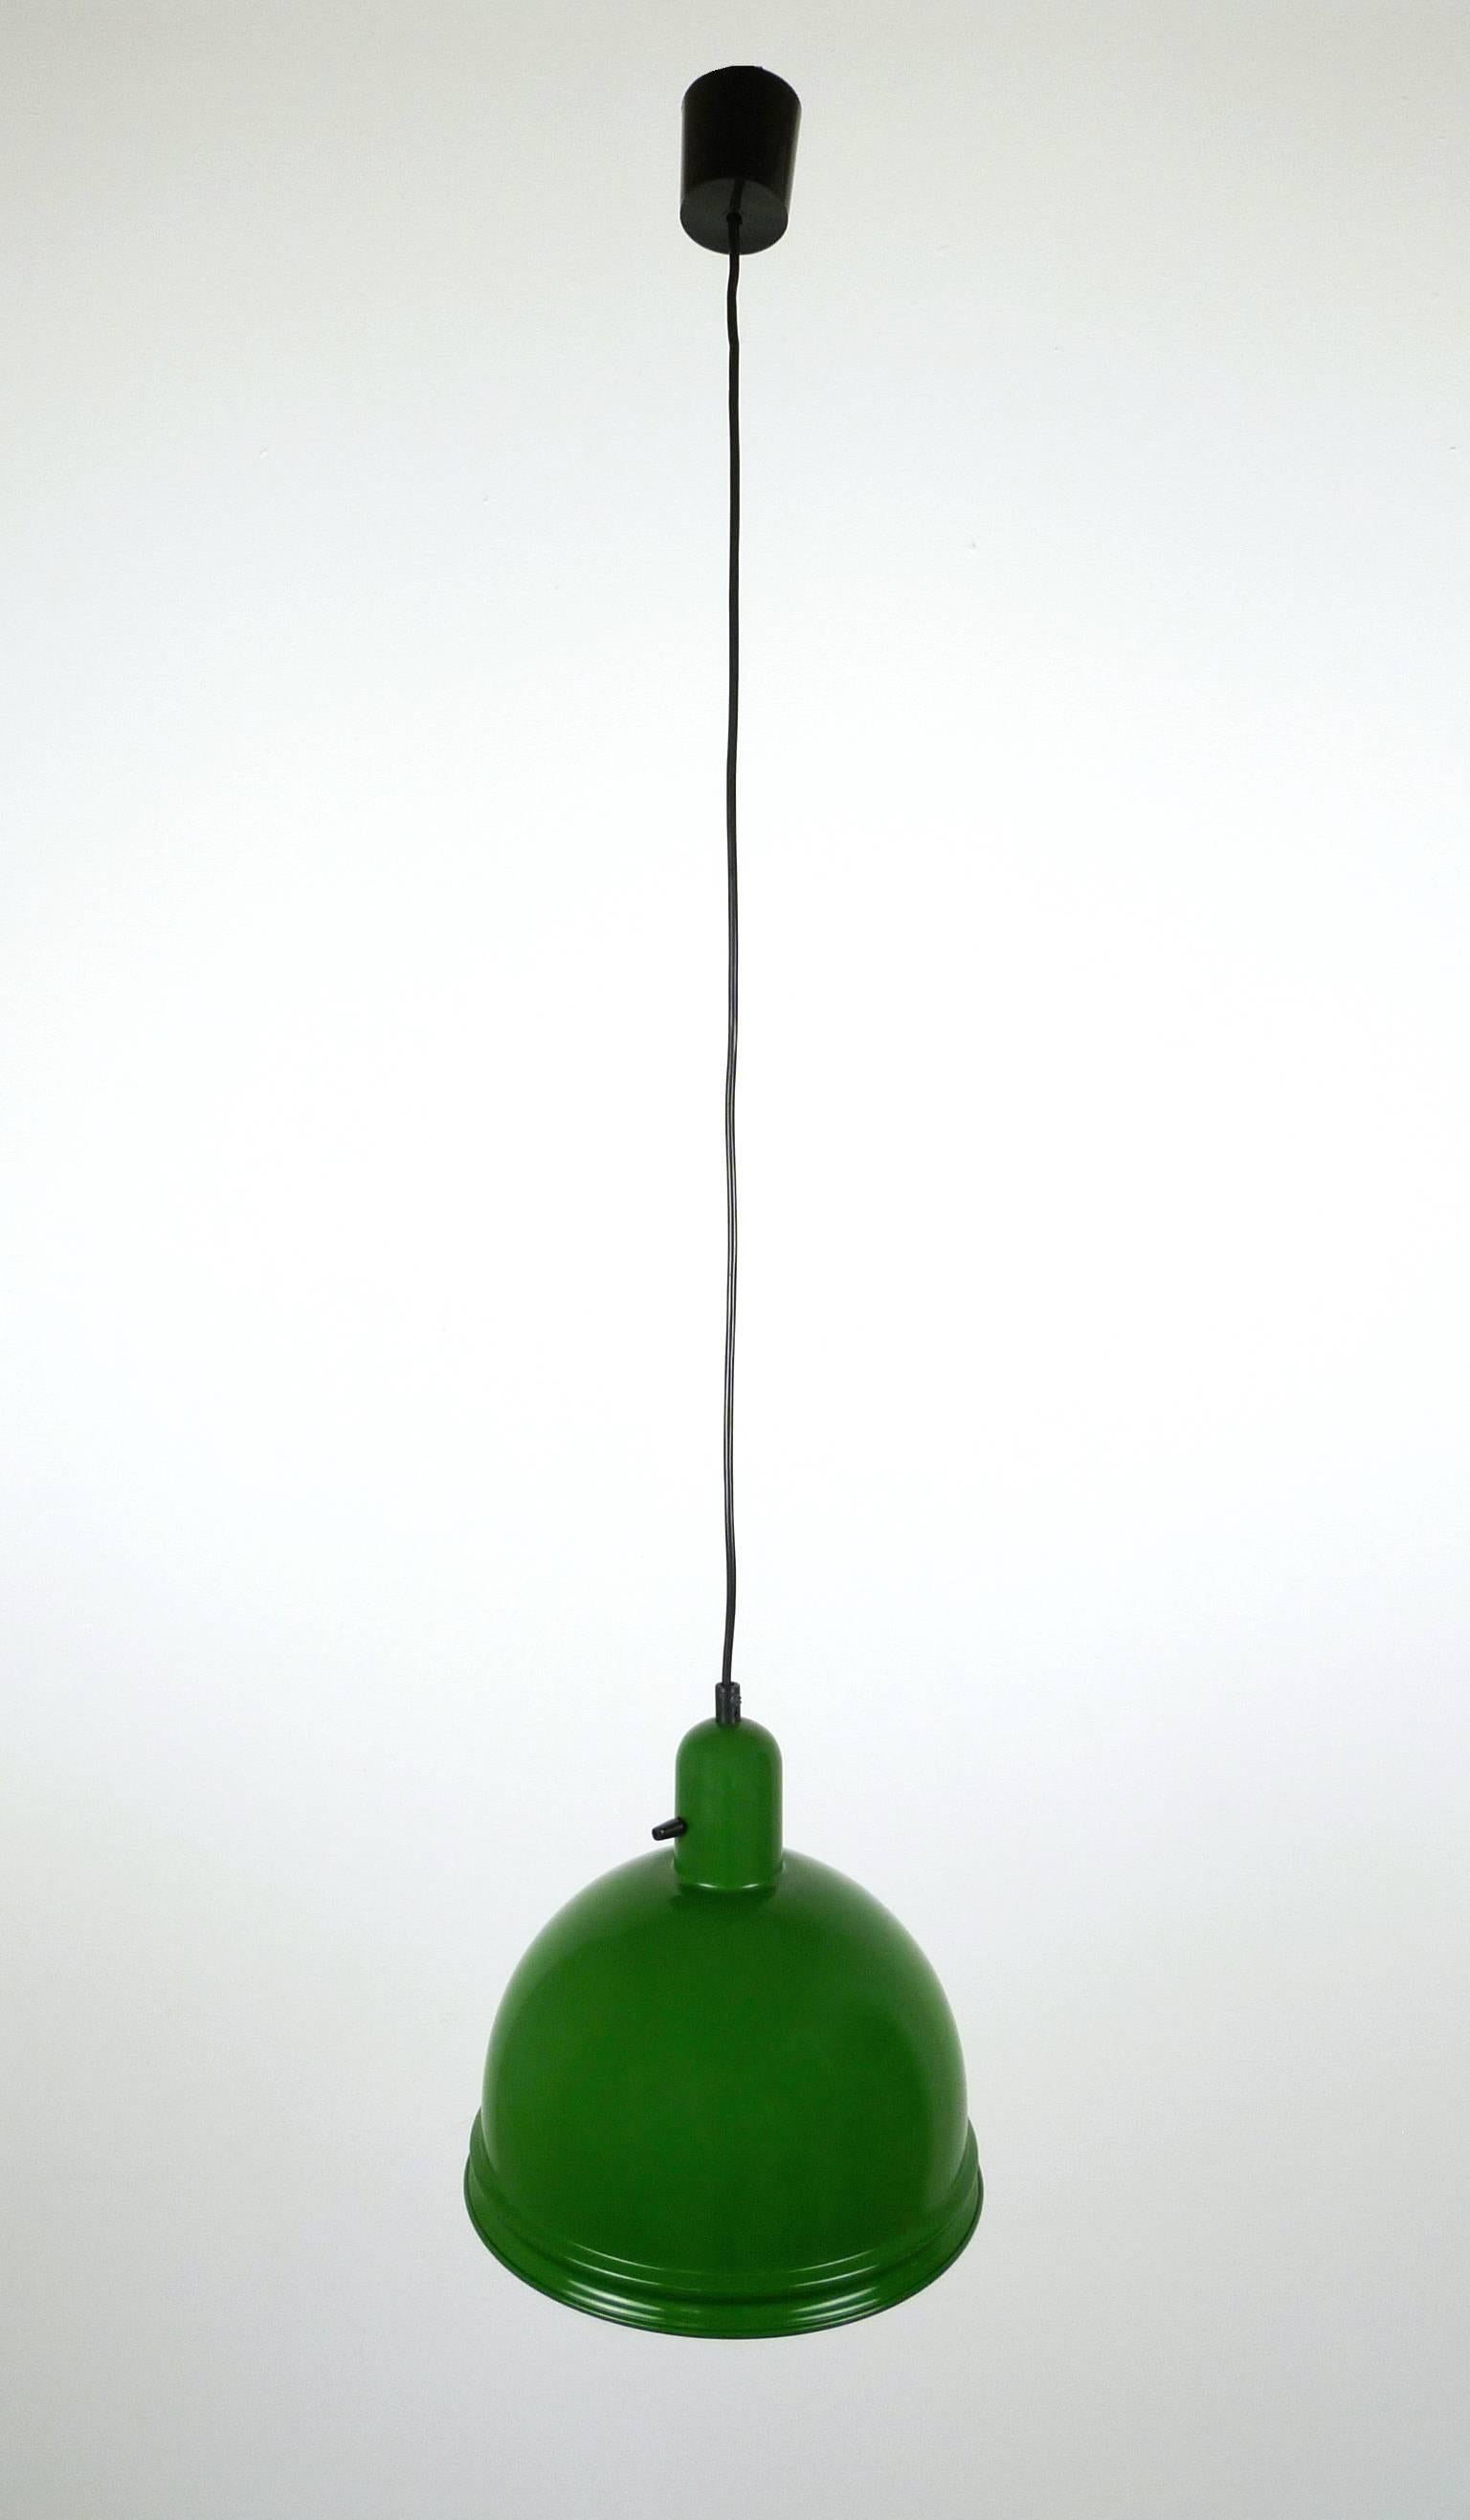 20th Century Green Industrial Light from Germany, 1950s